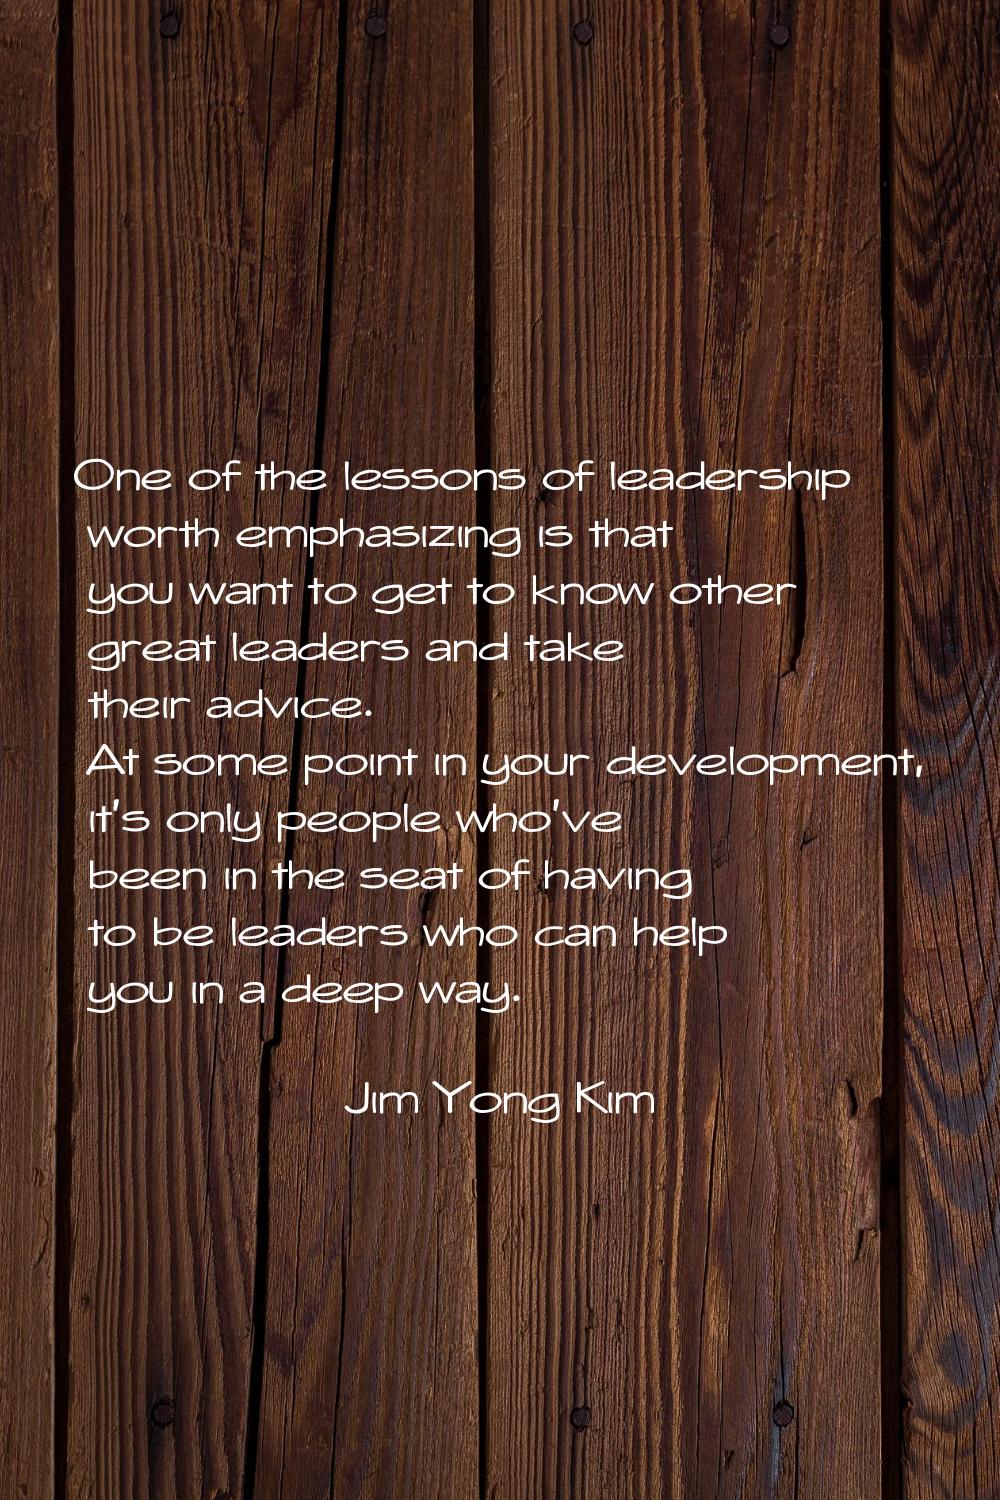 One of the lessons of leadership worth emphasizing is that you want to get to know other great lead